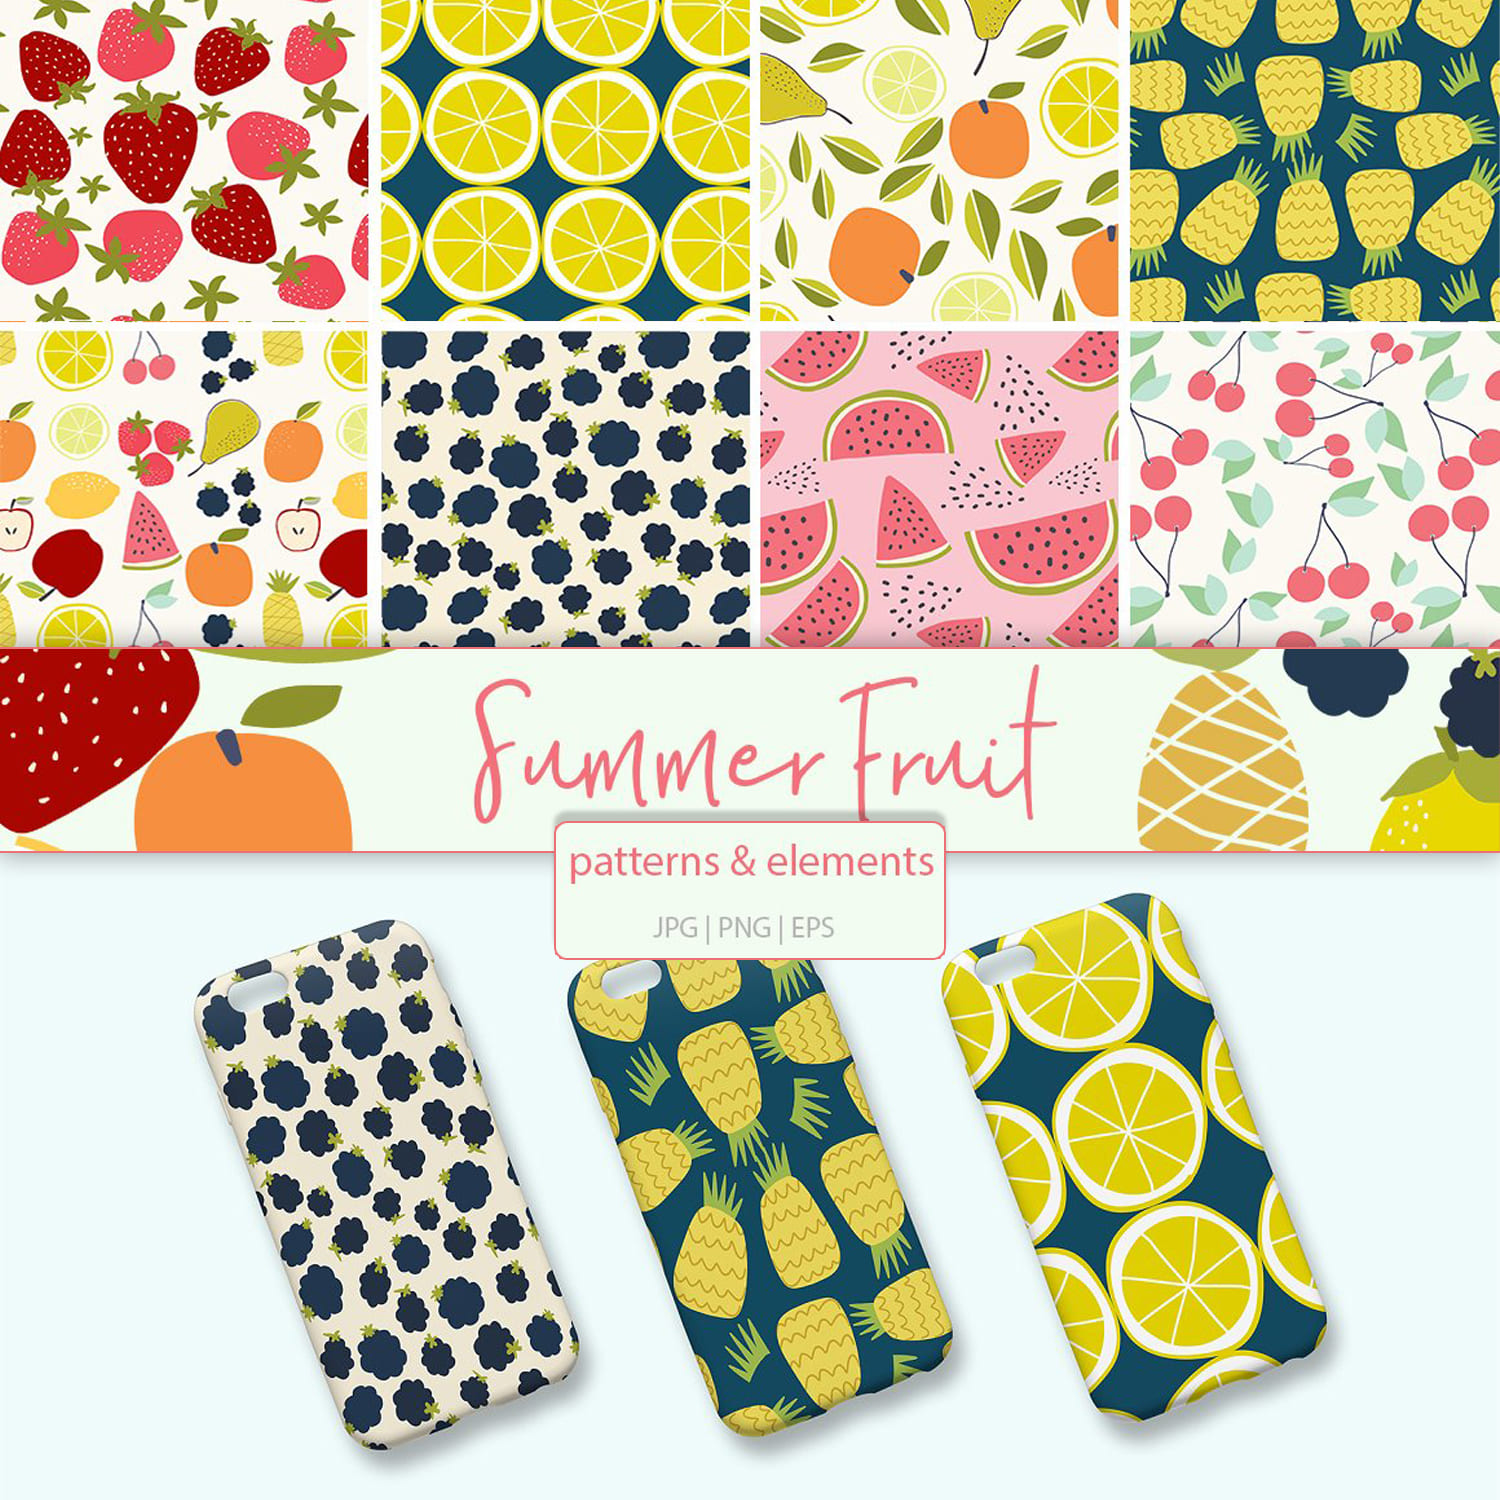 Summer Fruit Patterns and Elements cover image.